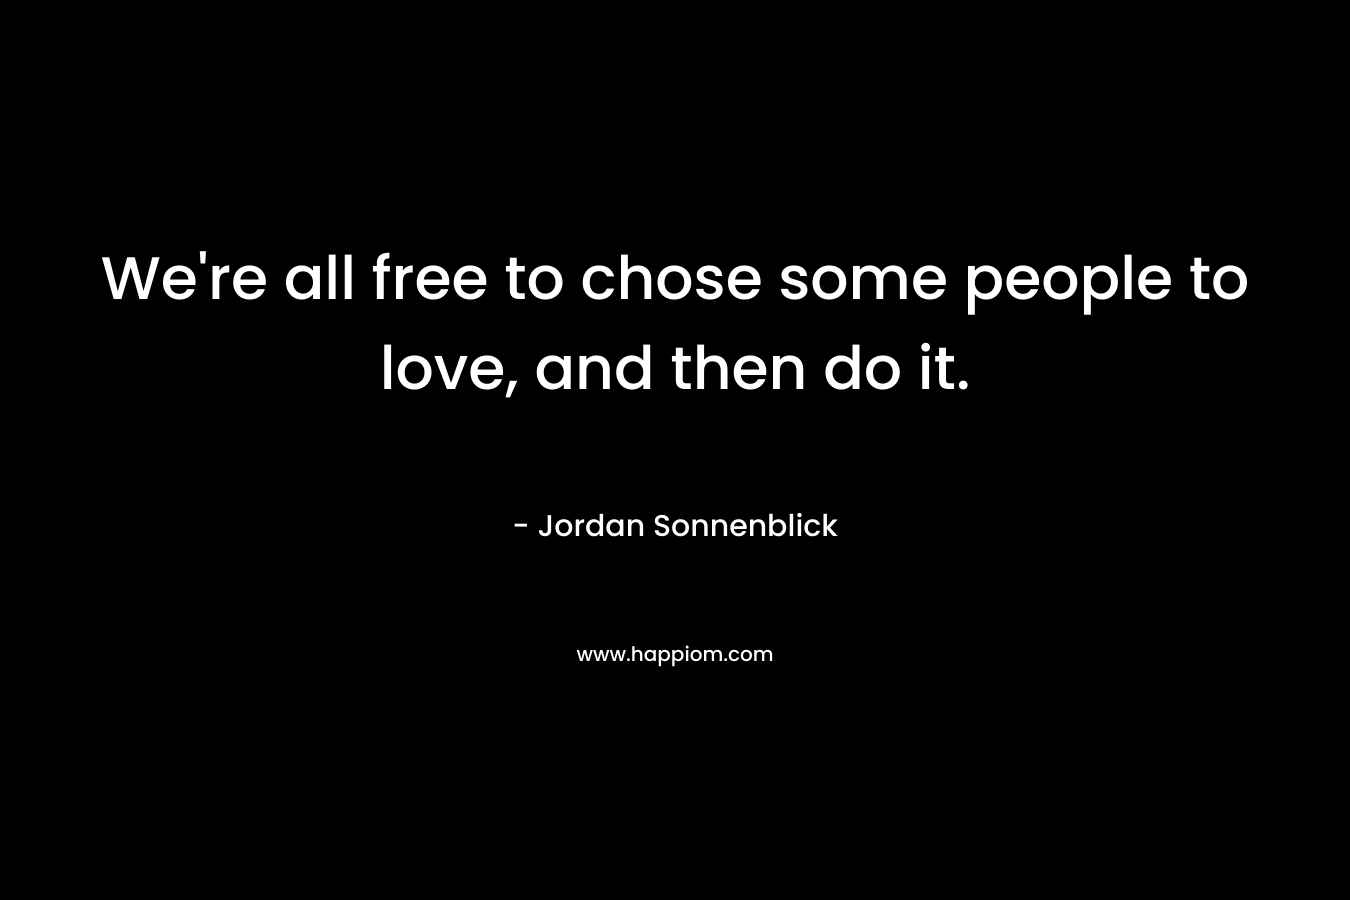 We're all free to chose some people to love, and then do it.